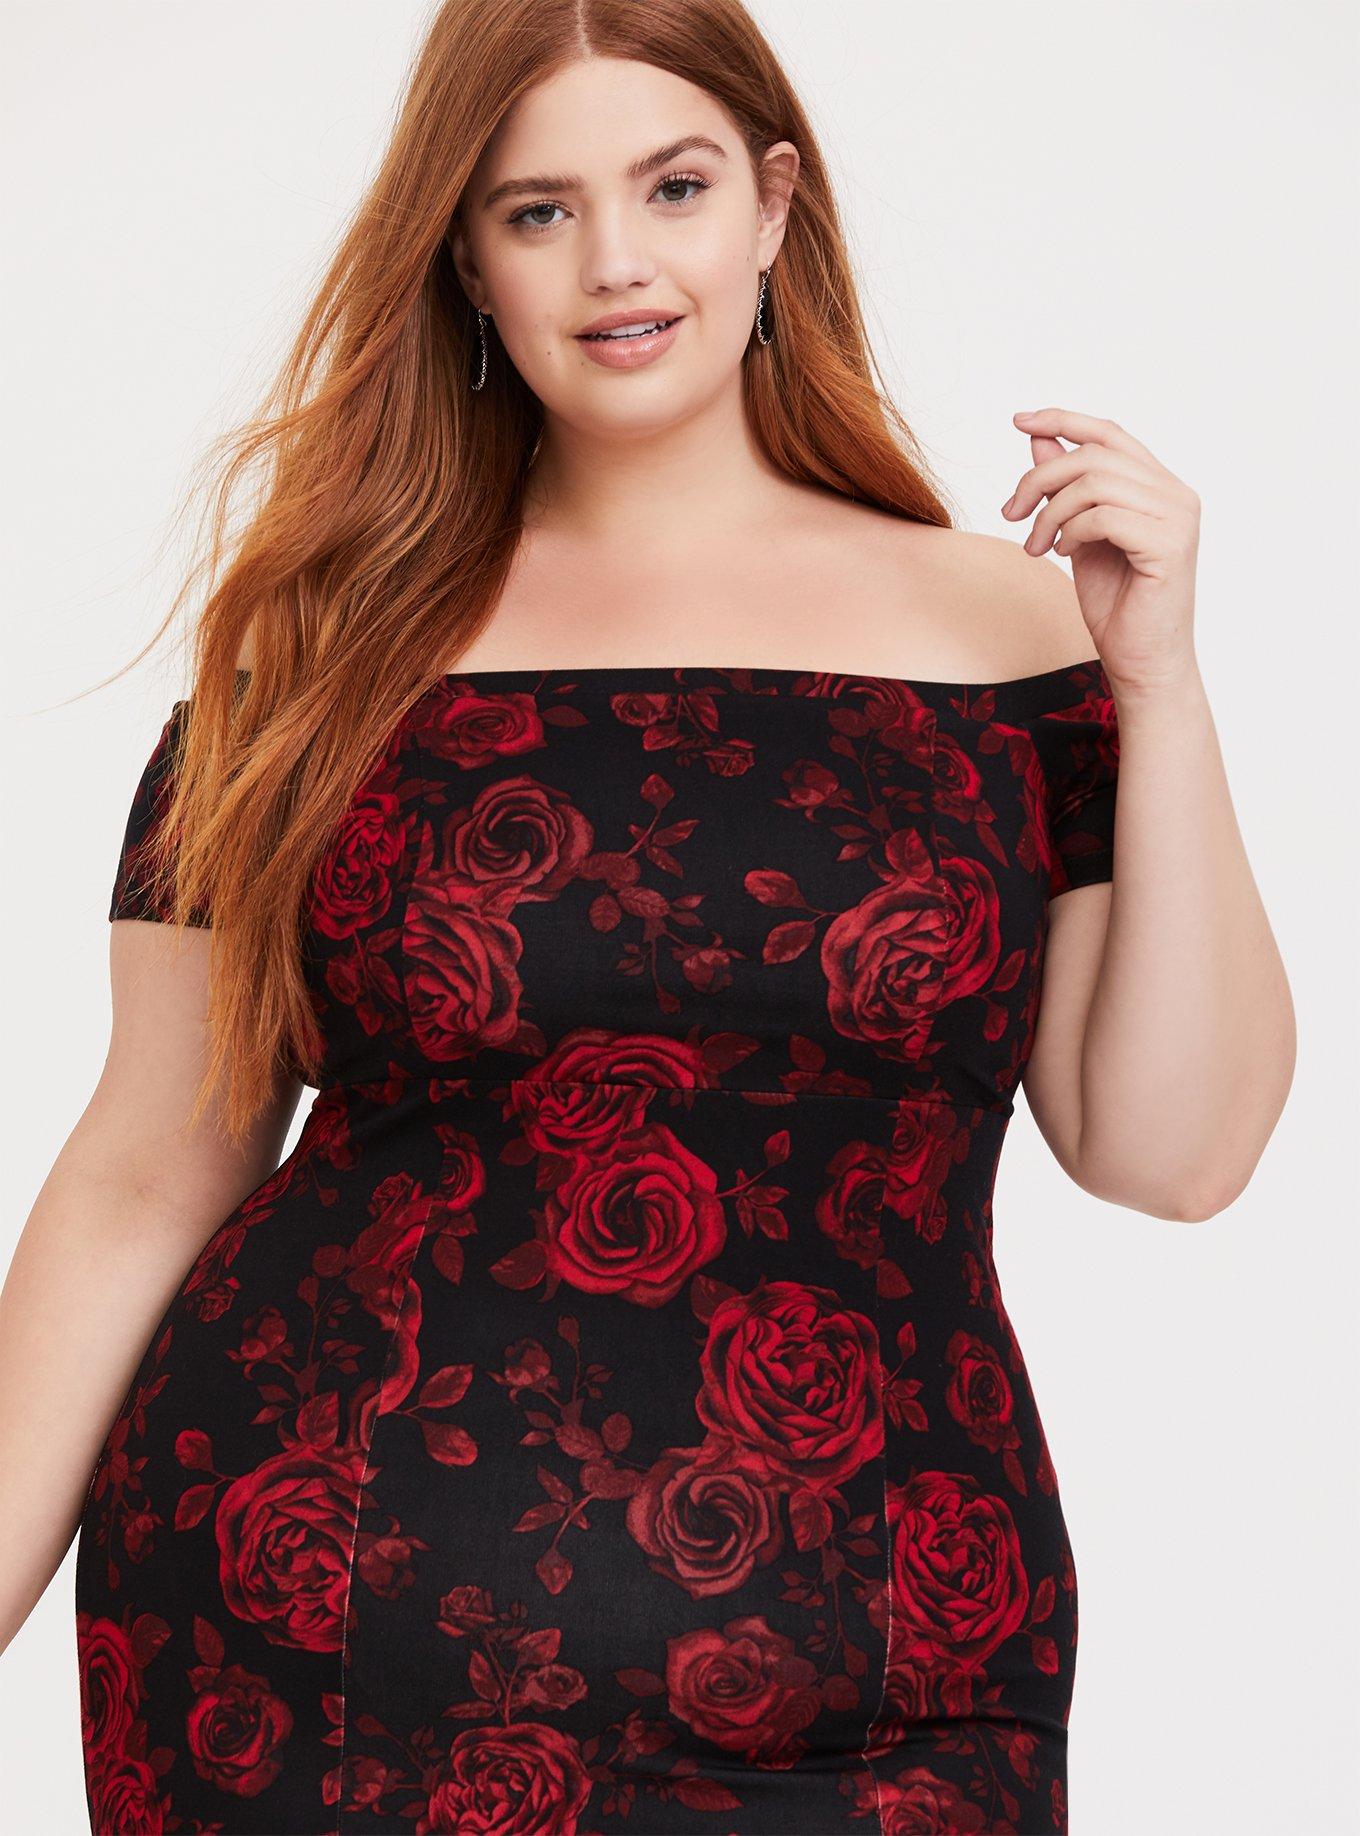 TORRID SIZE 26 Special Occasion Dress - Dresses